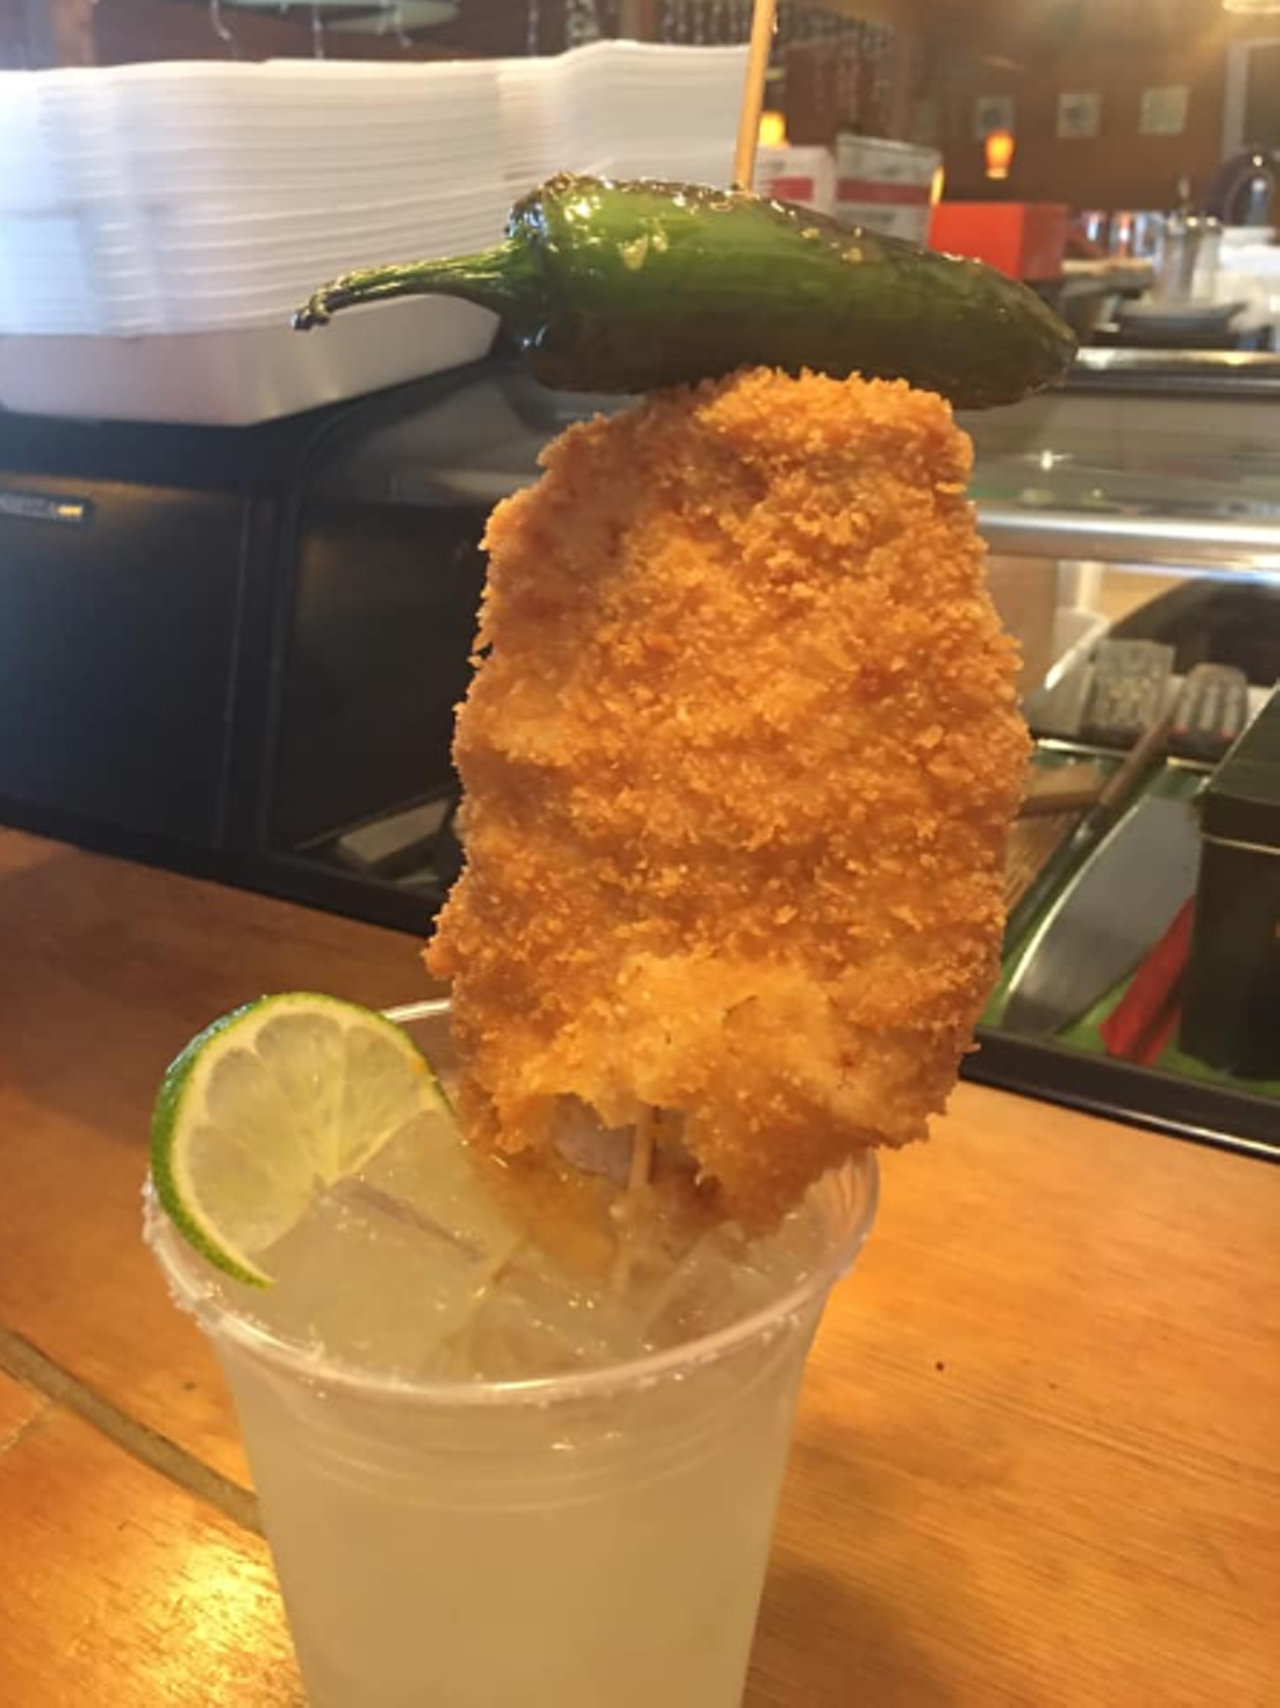 Godai Sushi Bar and Restaurant
11203 West Ave, (210) 348-6781, godaisushi.com
This tempura fried chicken and roasted jalapeno stuck into a sake margarita illustrates the puro commitment to food/booze pairings here. Plenty of curbside alcohol options.
Photo via Facebook /  
Godai Sushi Bar and Restaurant